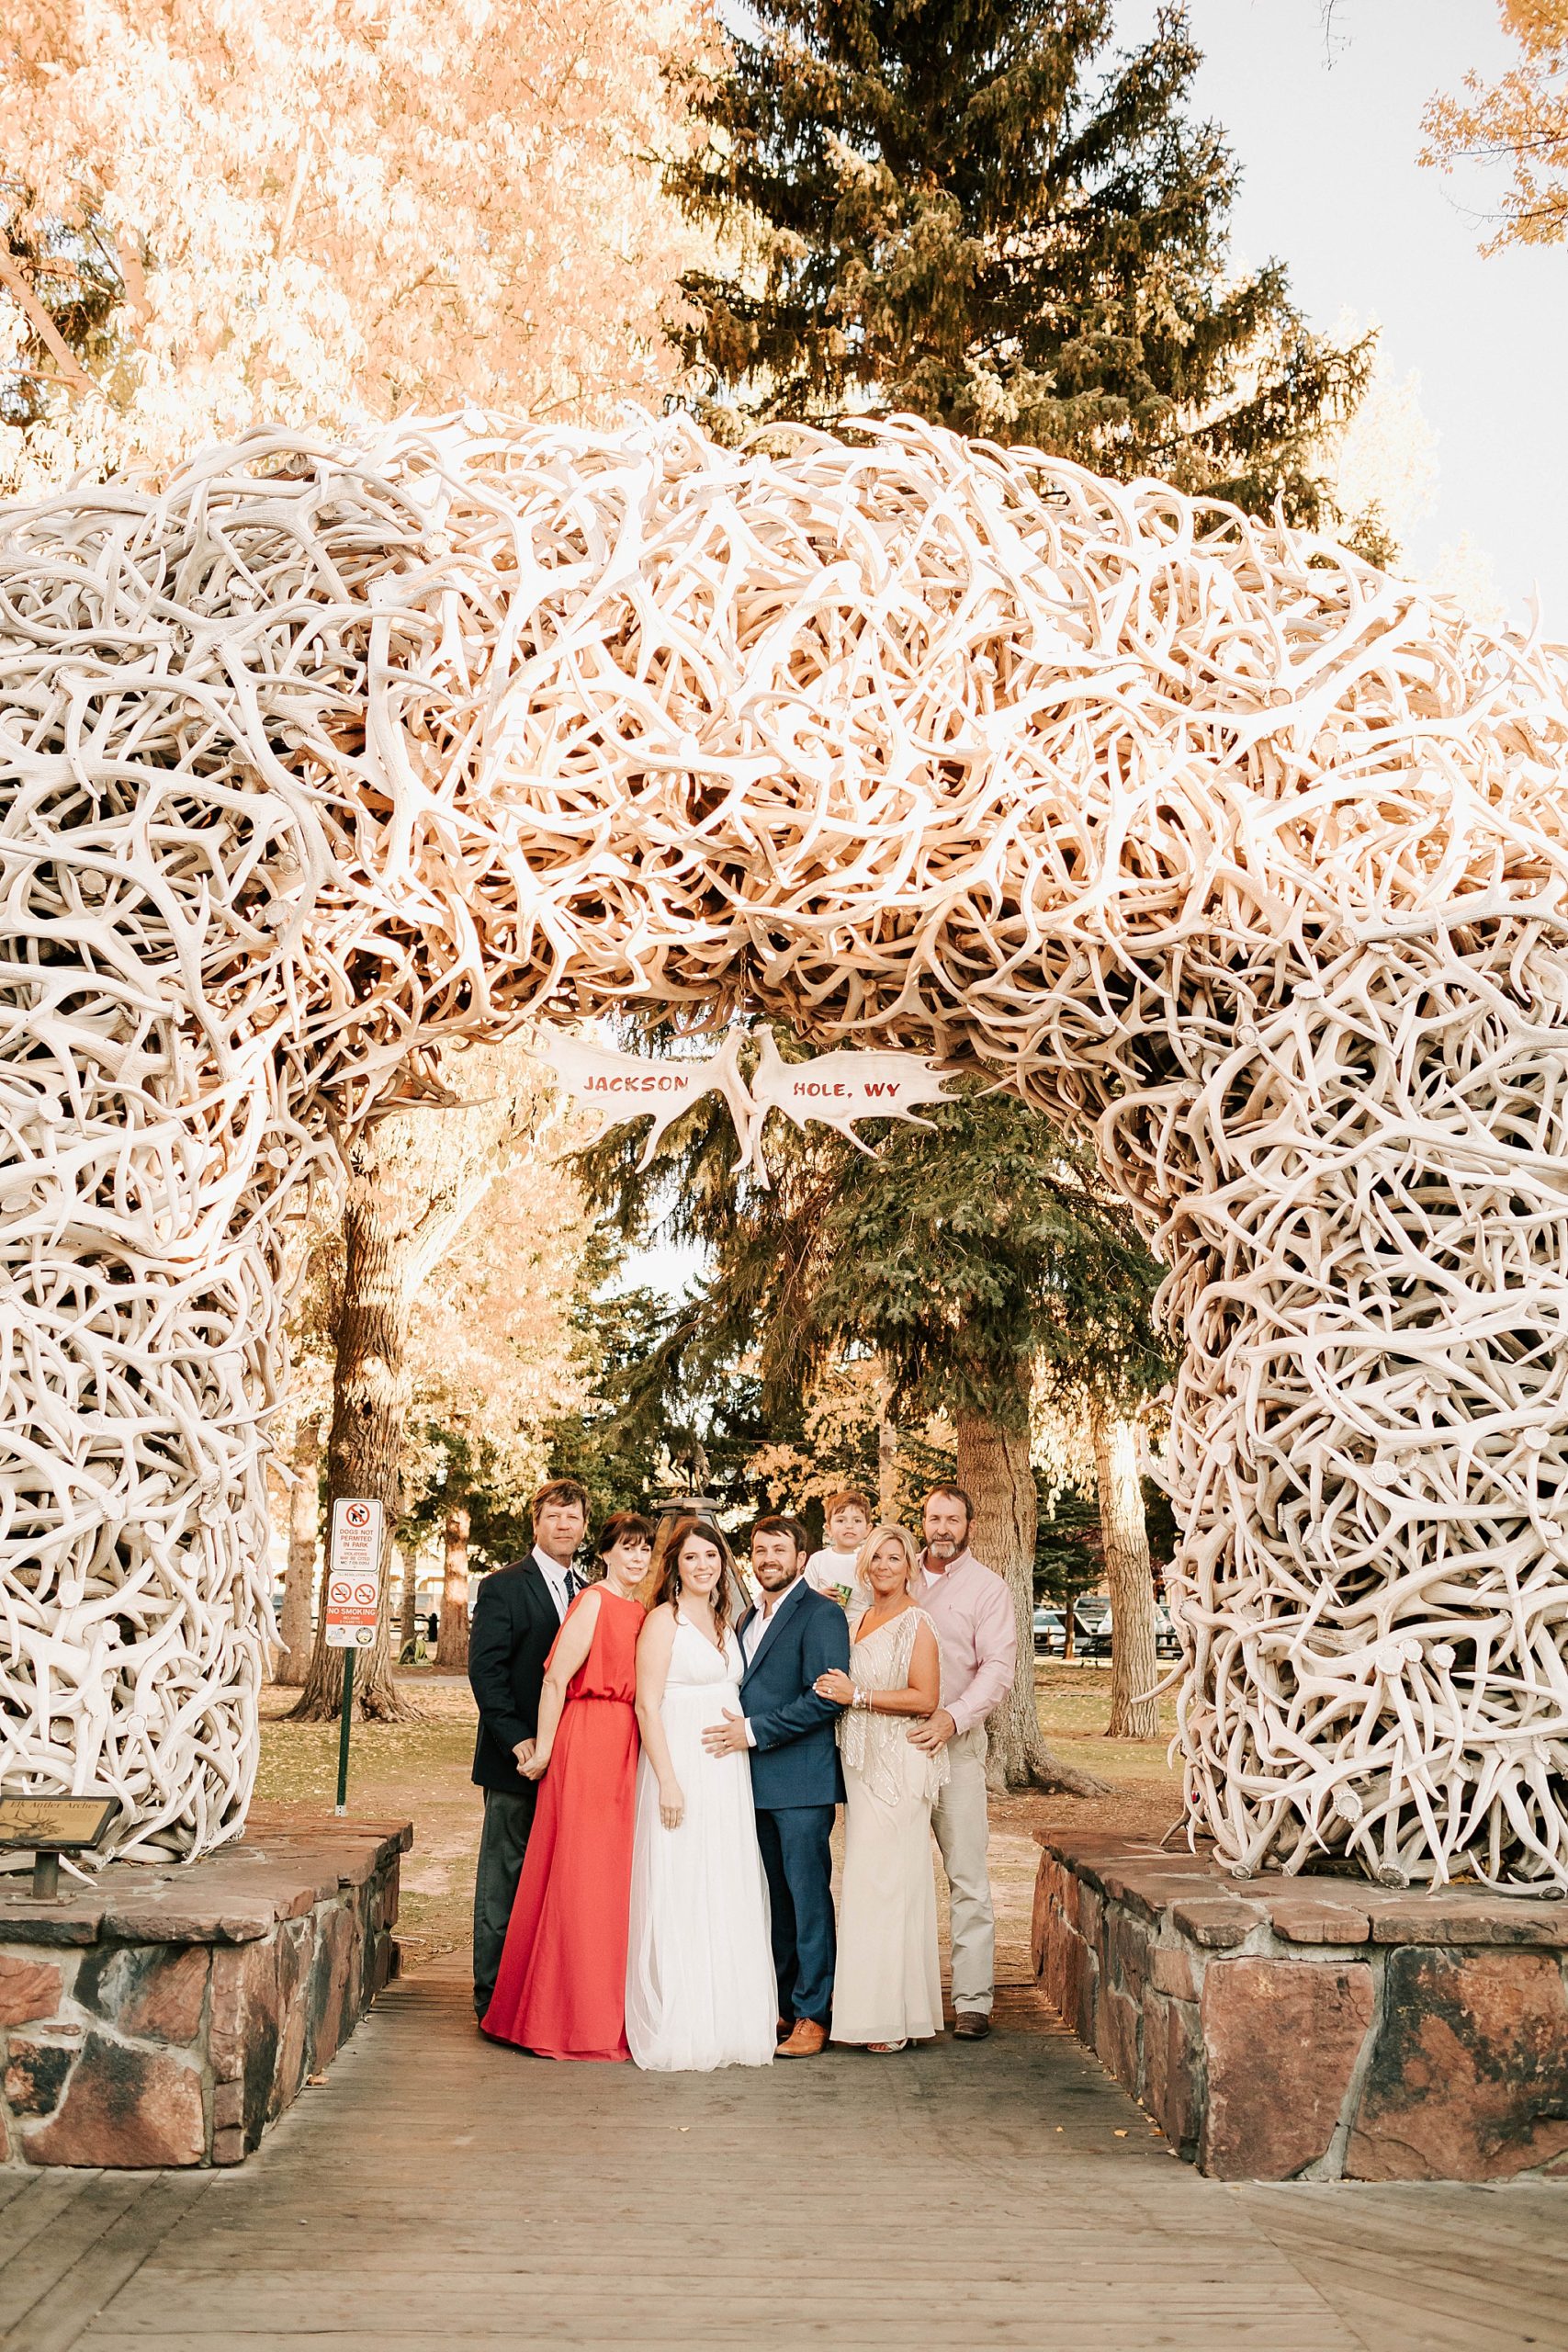 bride and groom with their parents and their child at an arch in Town Square after their intimate Moulton Barn wedding.